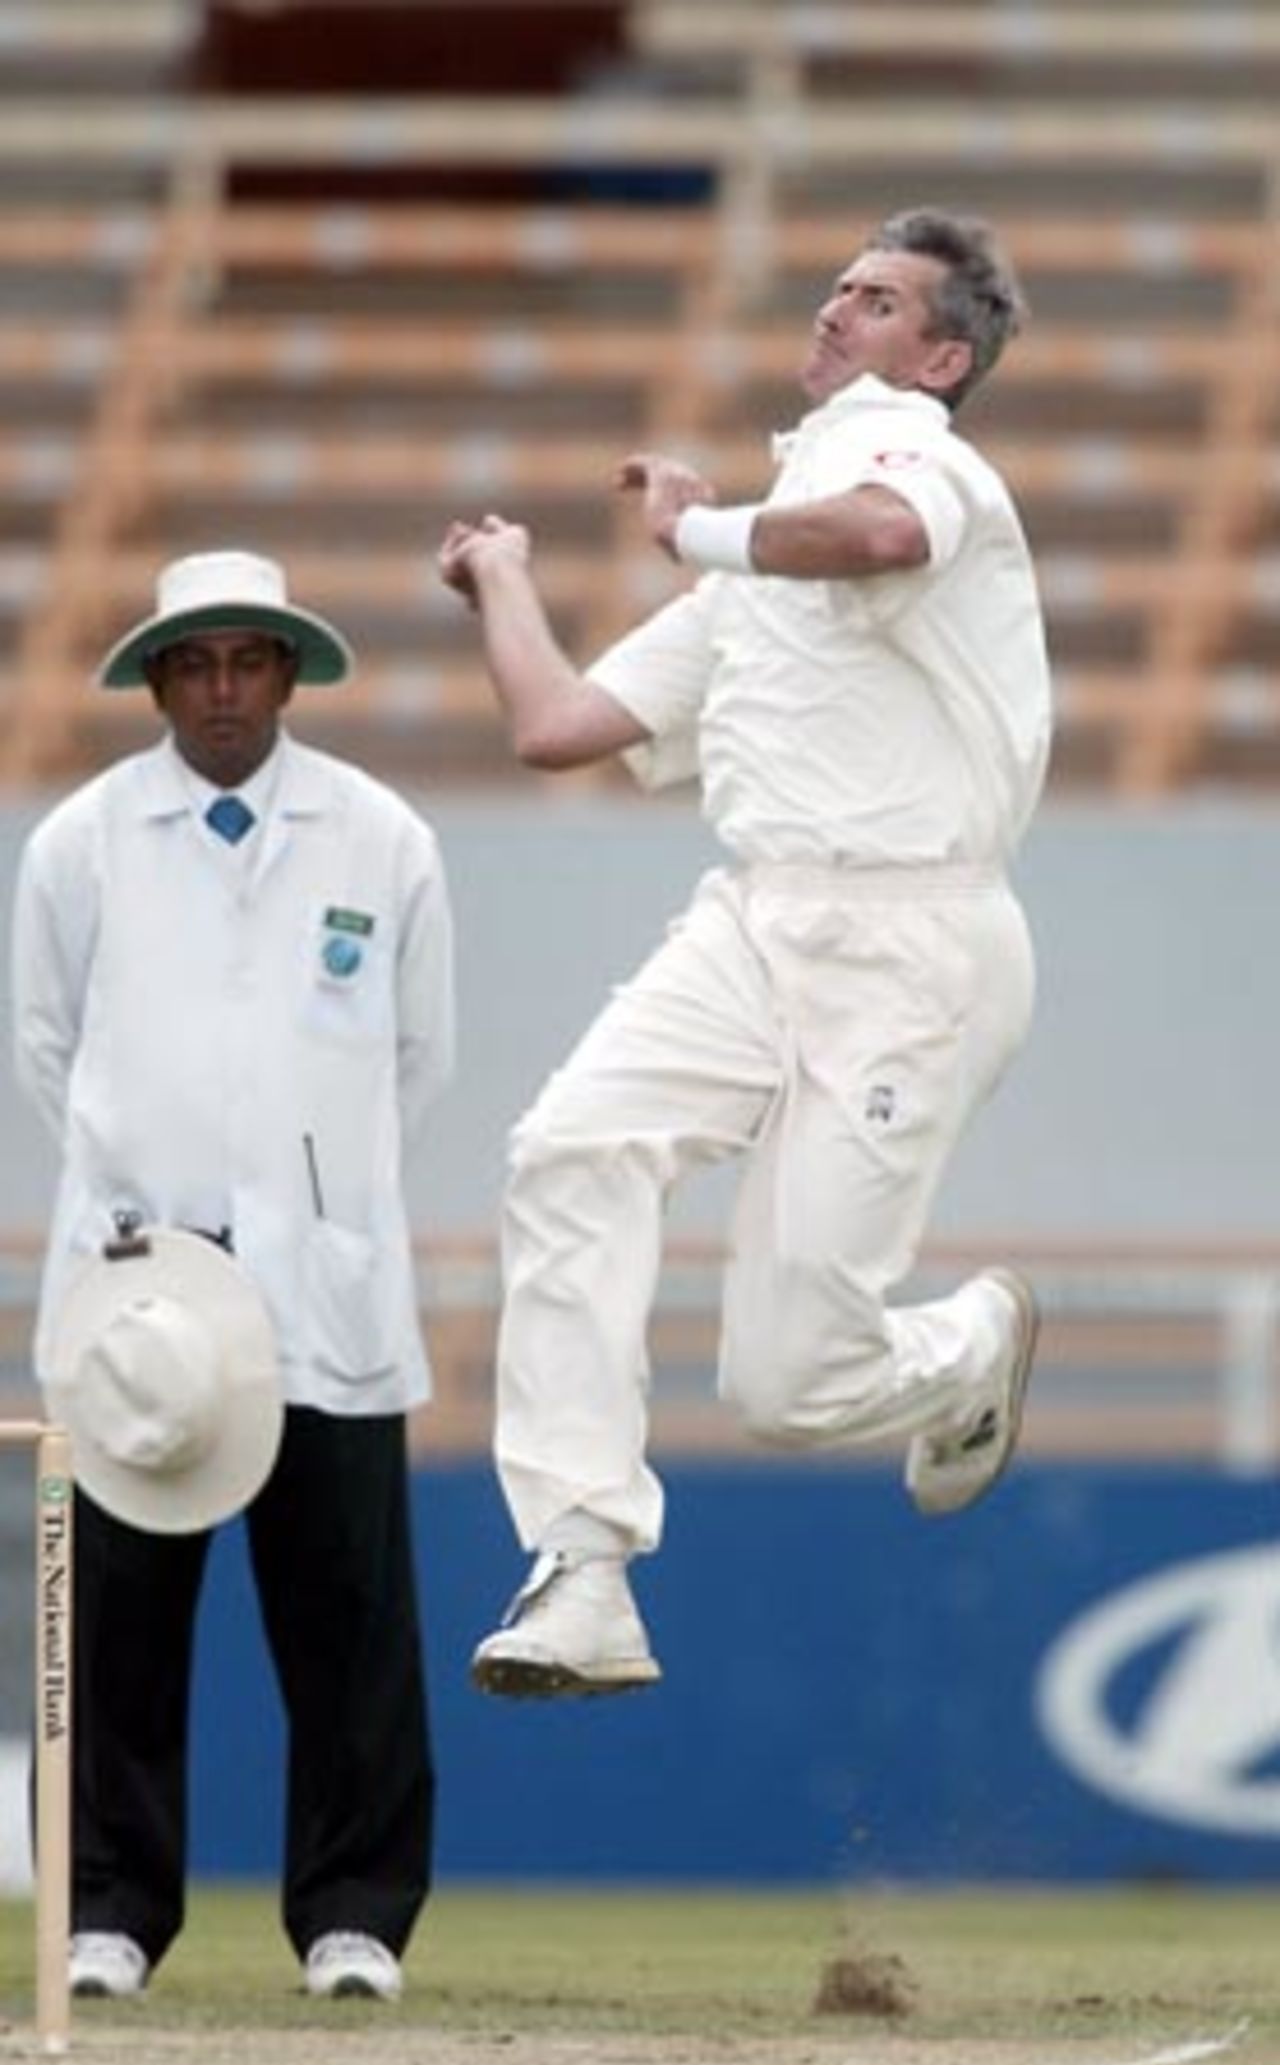 England bowler Andy Caddick delivers a ball during his second innings spell of 6-122 from 25 overs while umpire Asoka de Silva from Sri Lanka looks on. 1st Test: New Zealand v England at Jade Stadium, Christchurch, 13-17 March 2002 (16 March 2002).